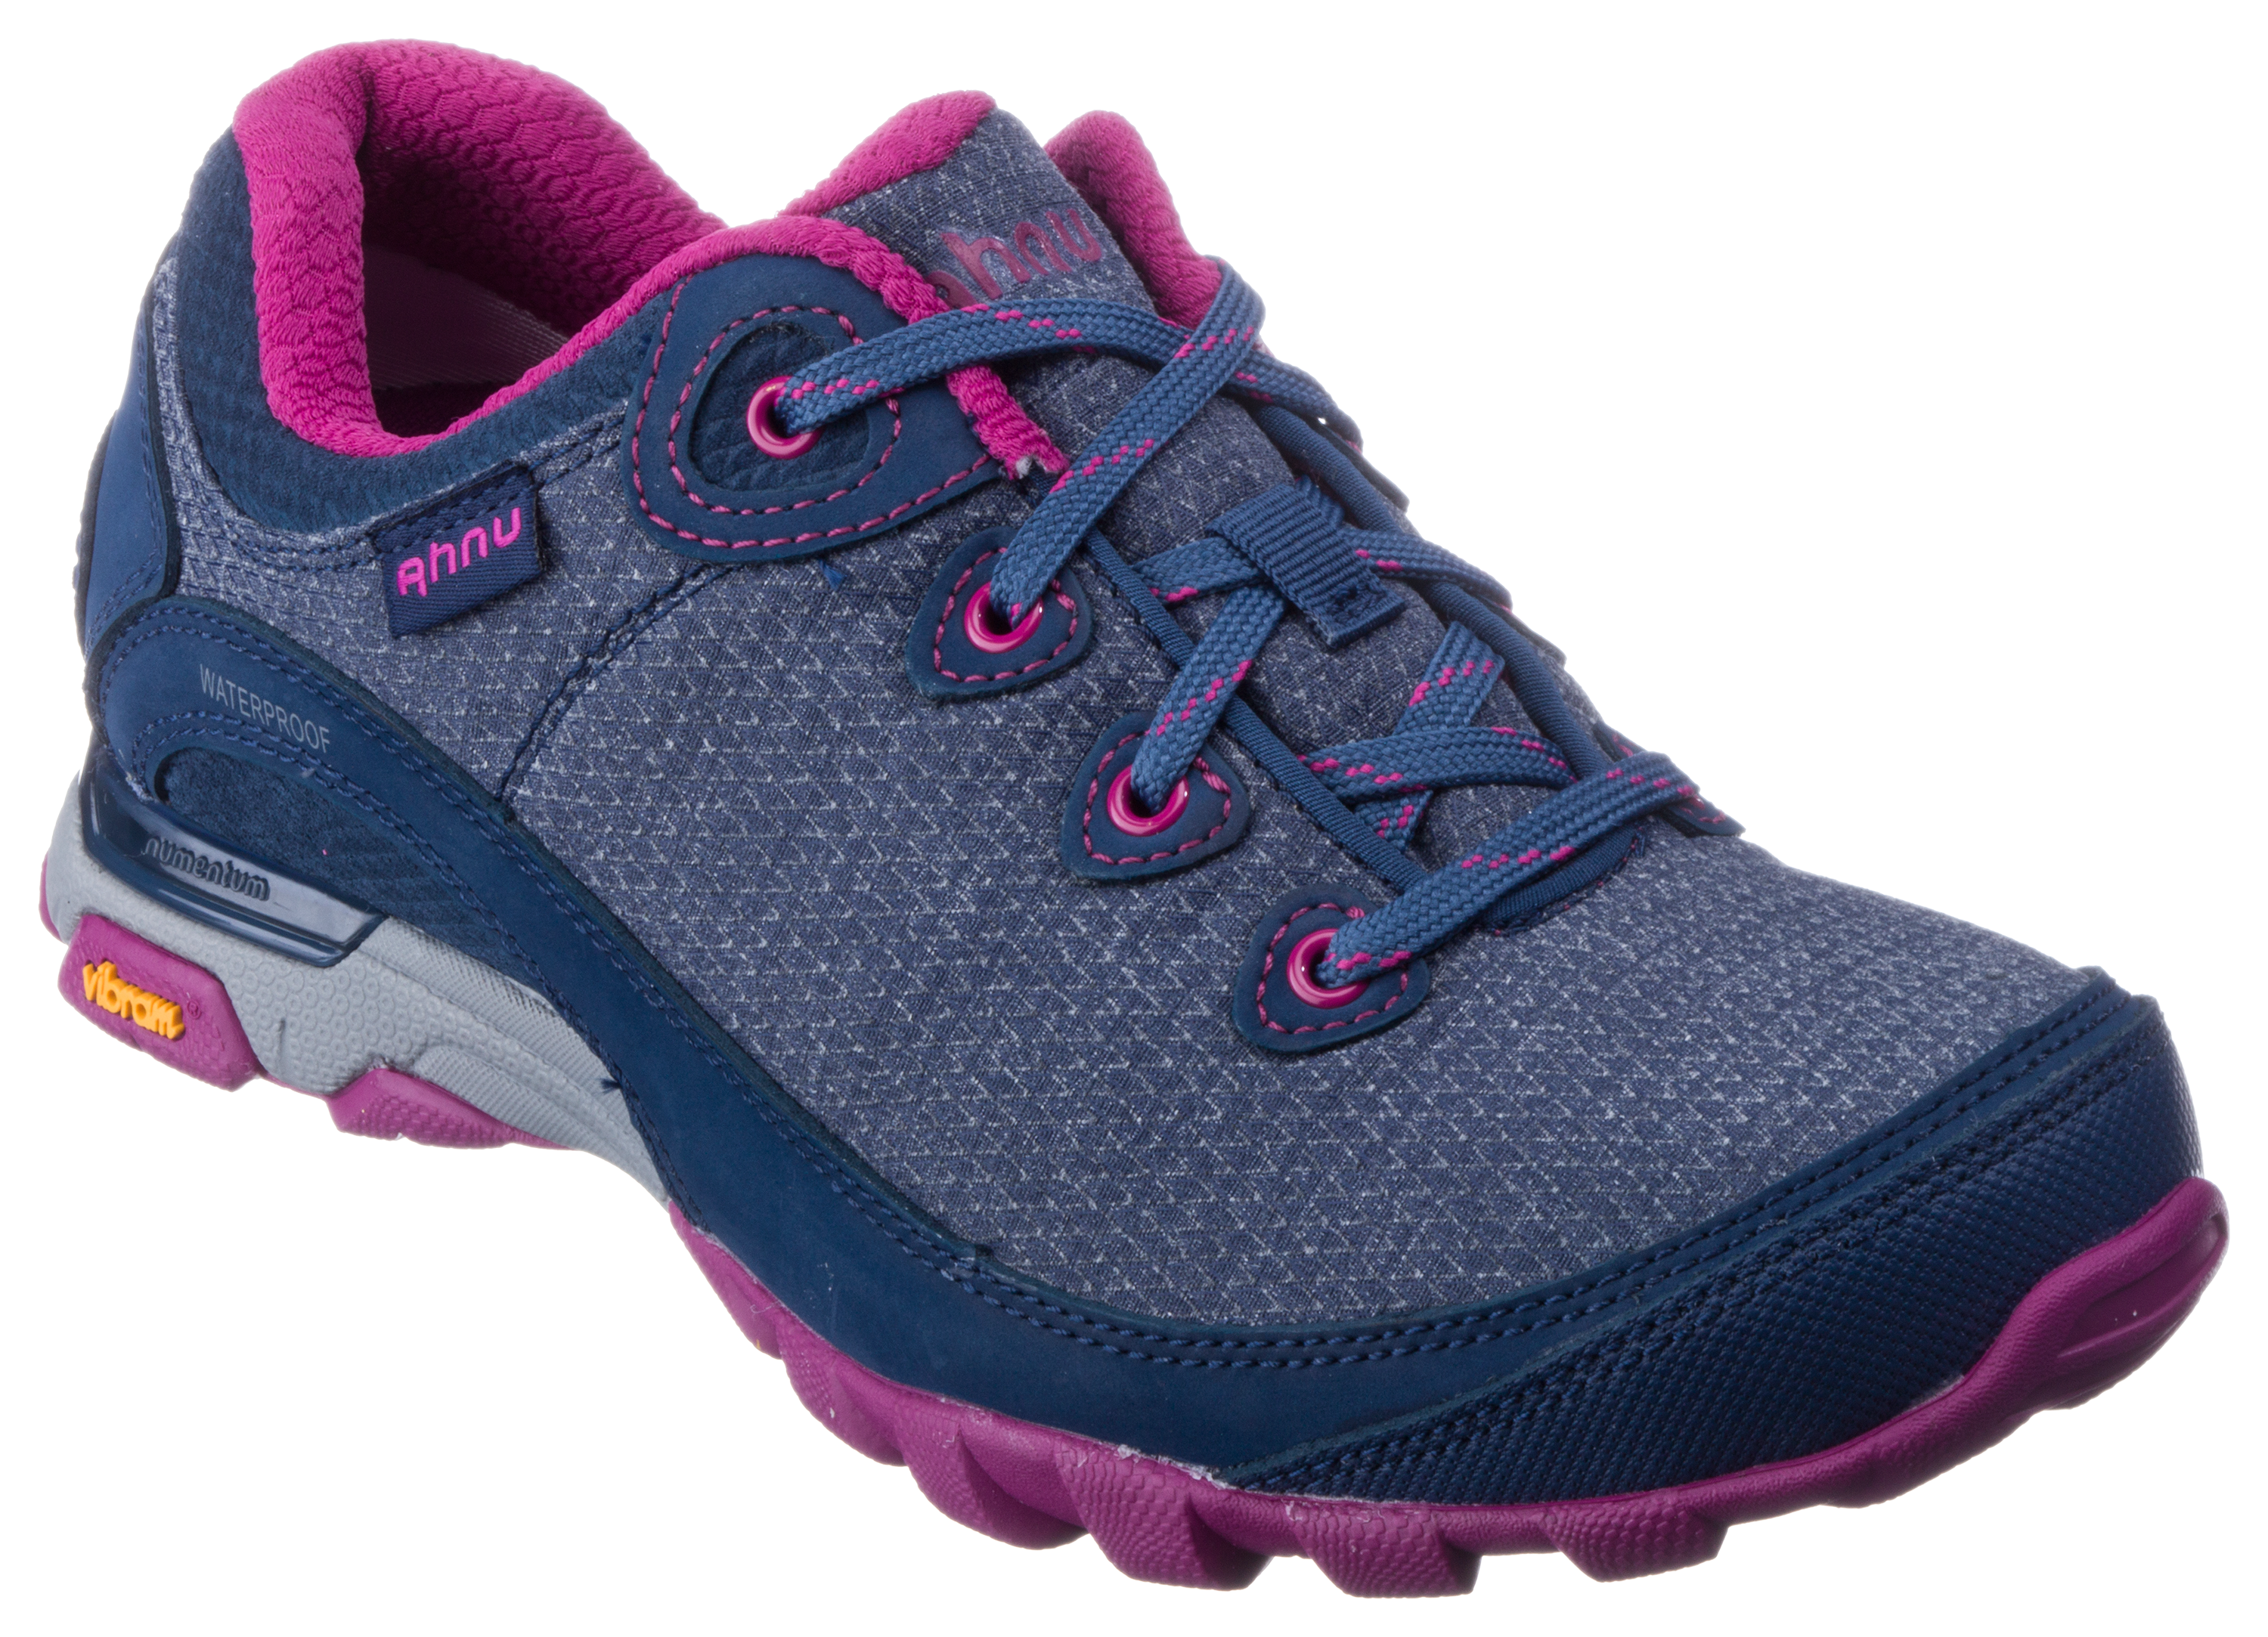 Ahnu Hiking Athletic Shoes for Women